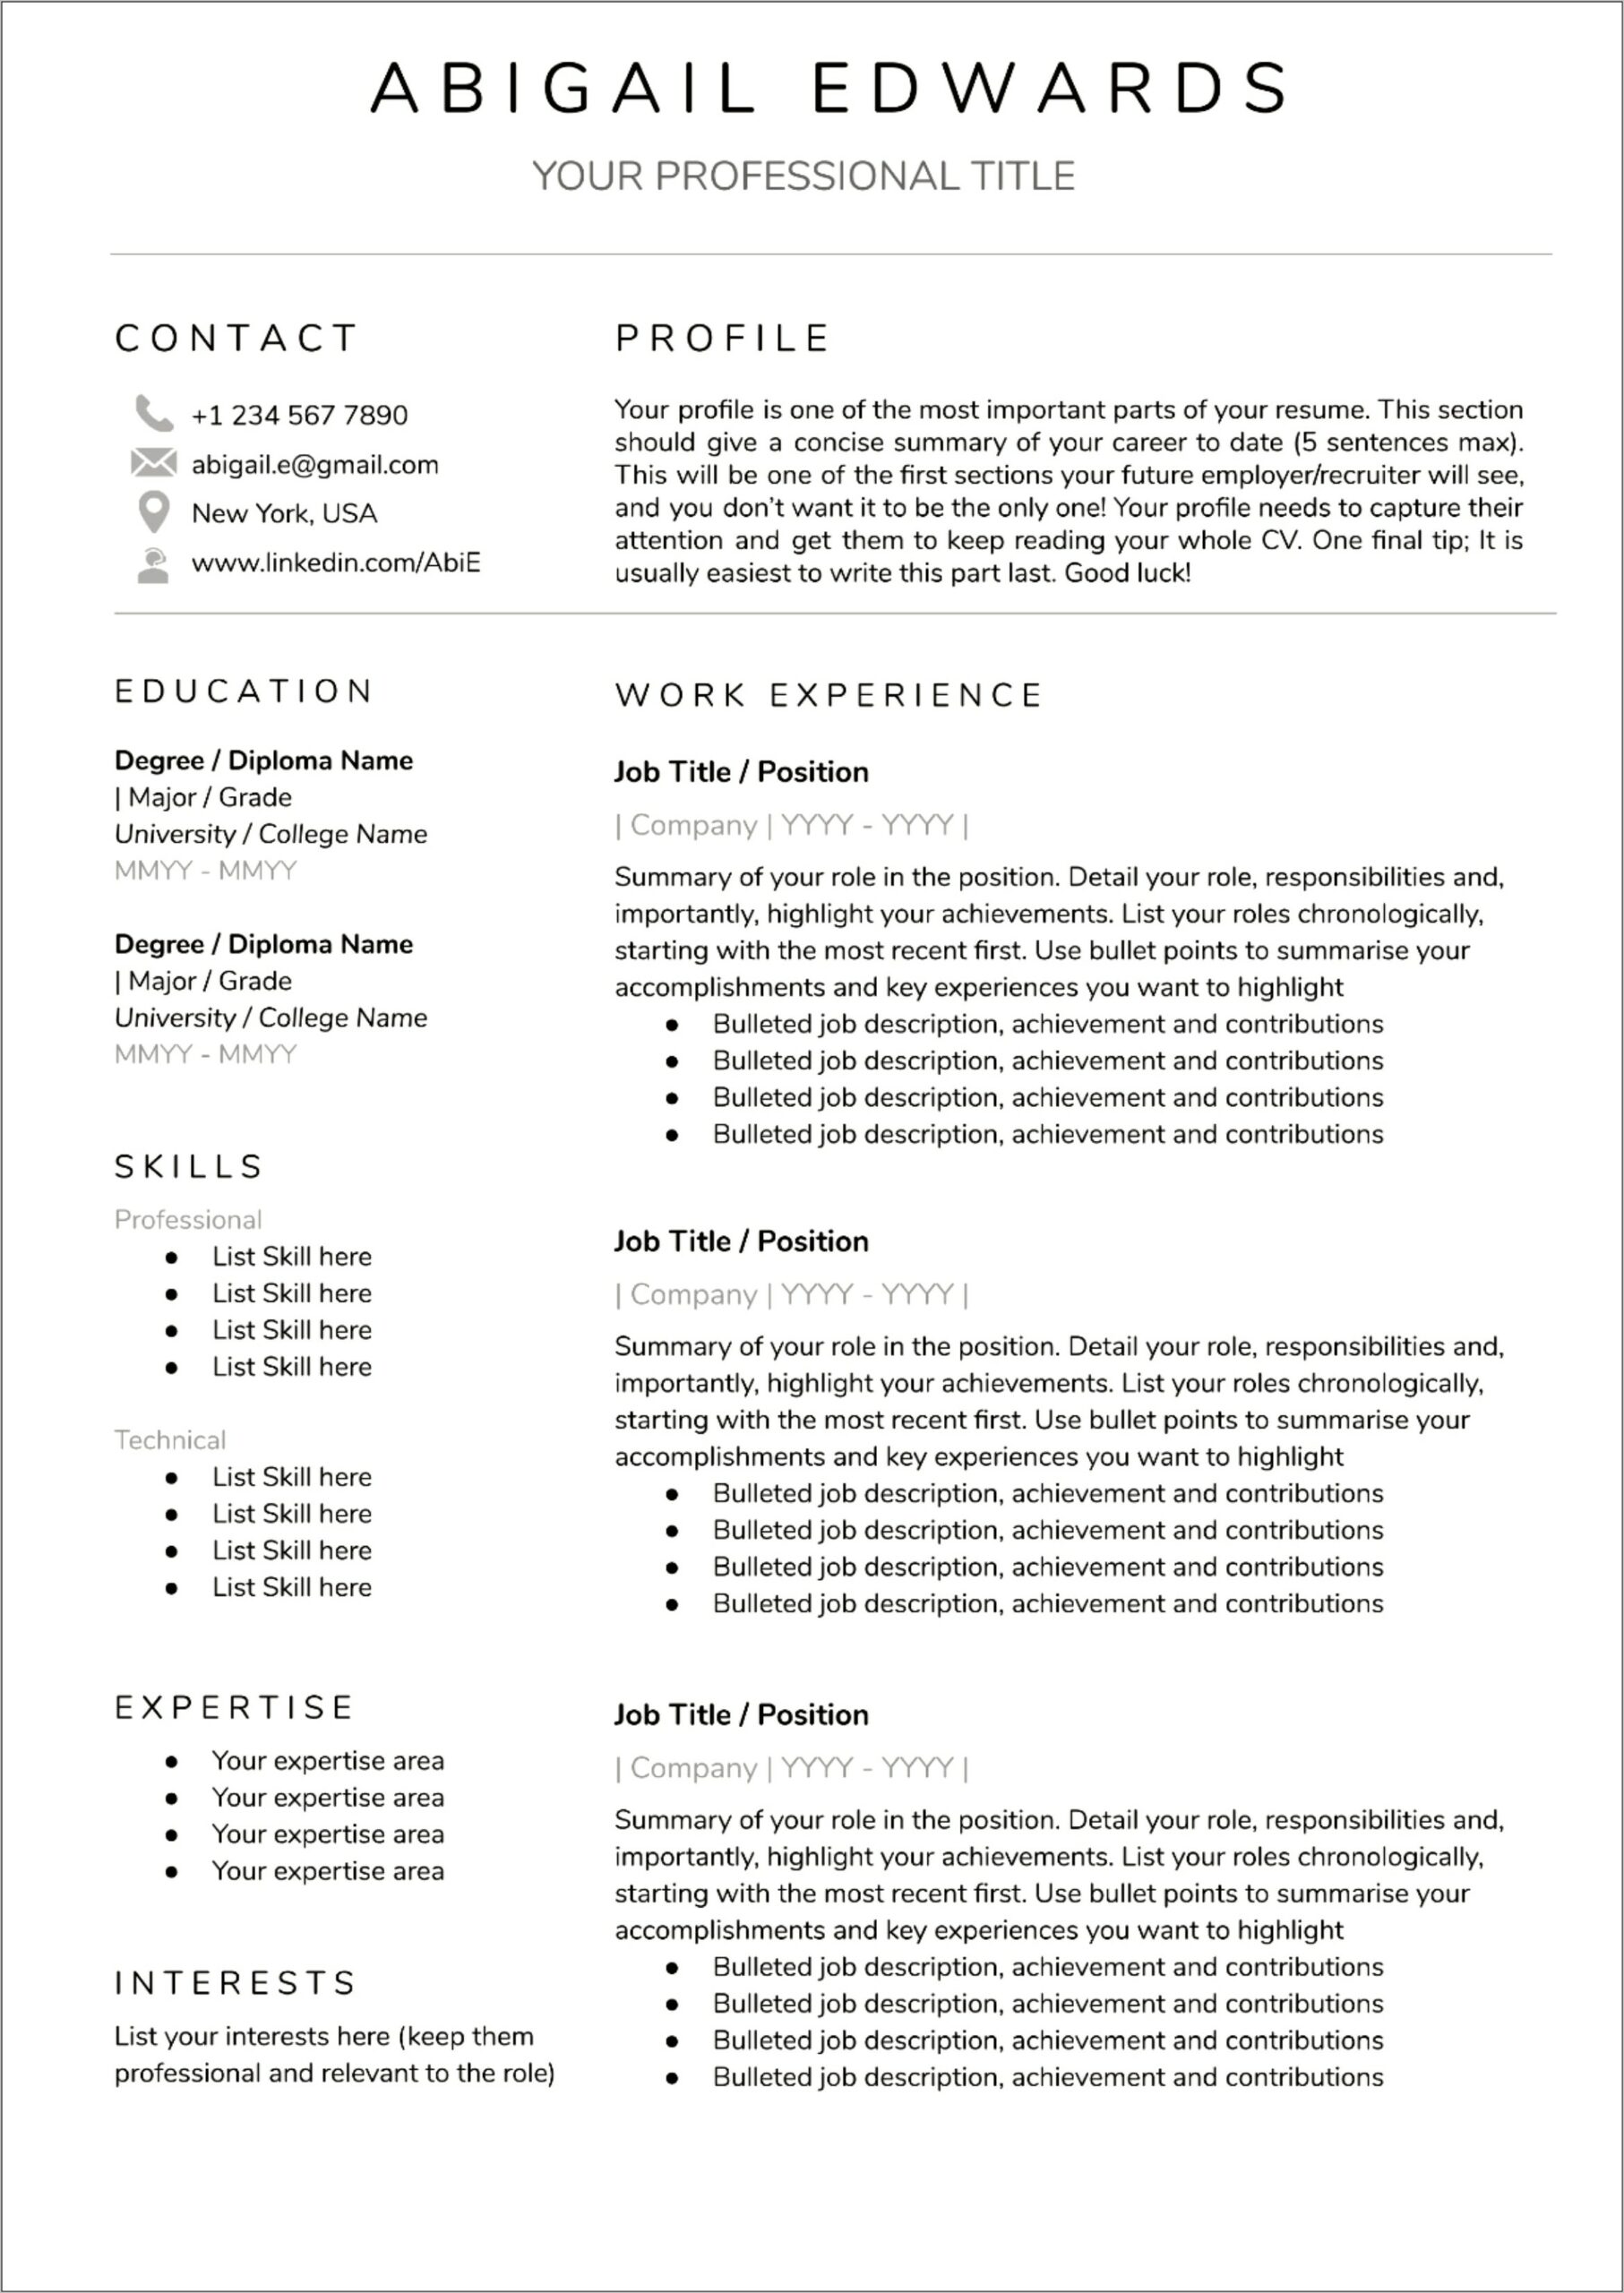 Resume Job Title Or Company First